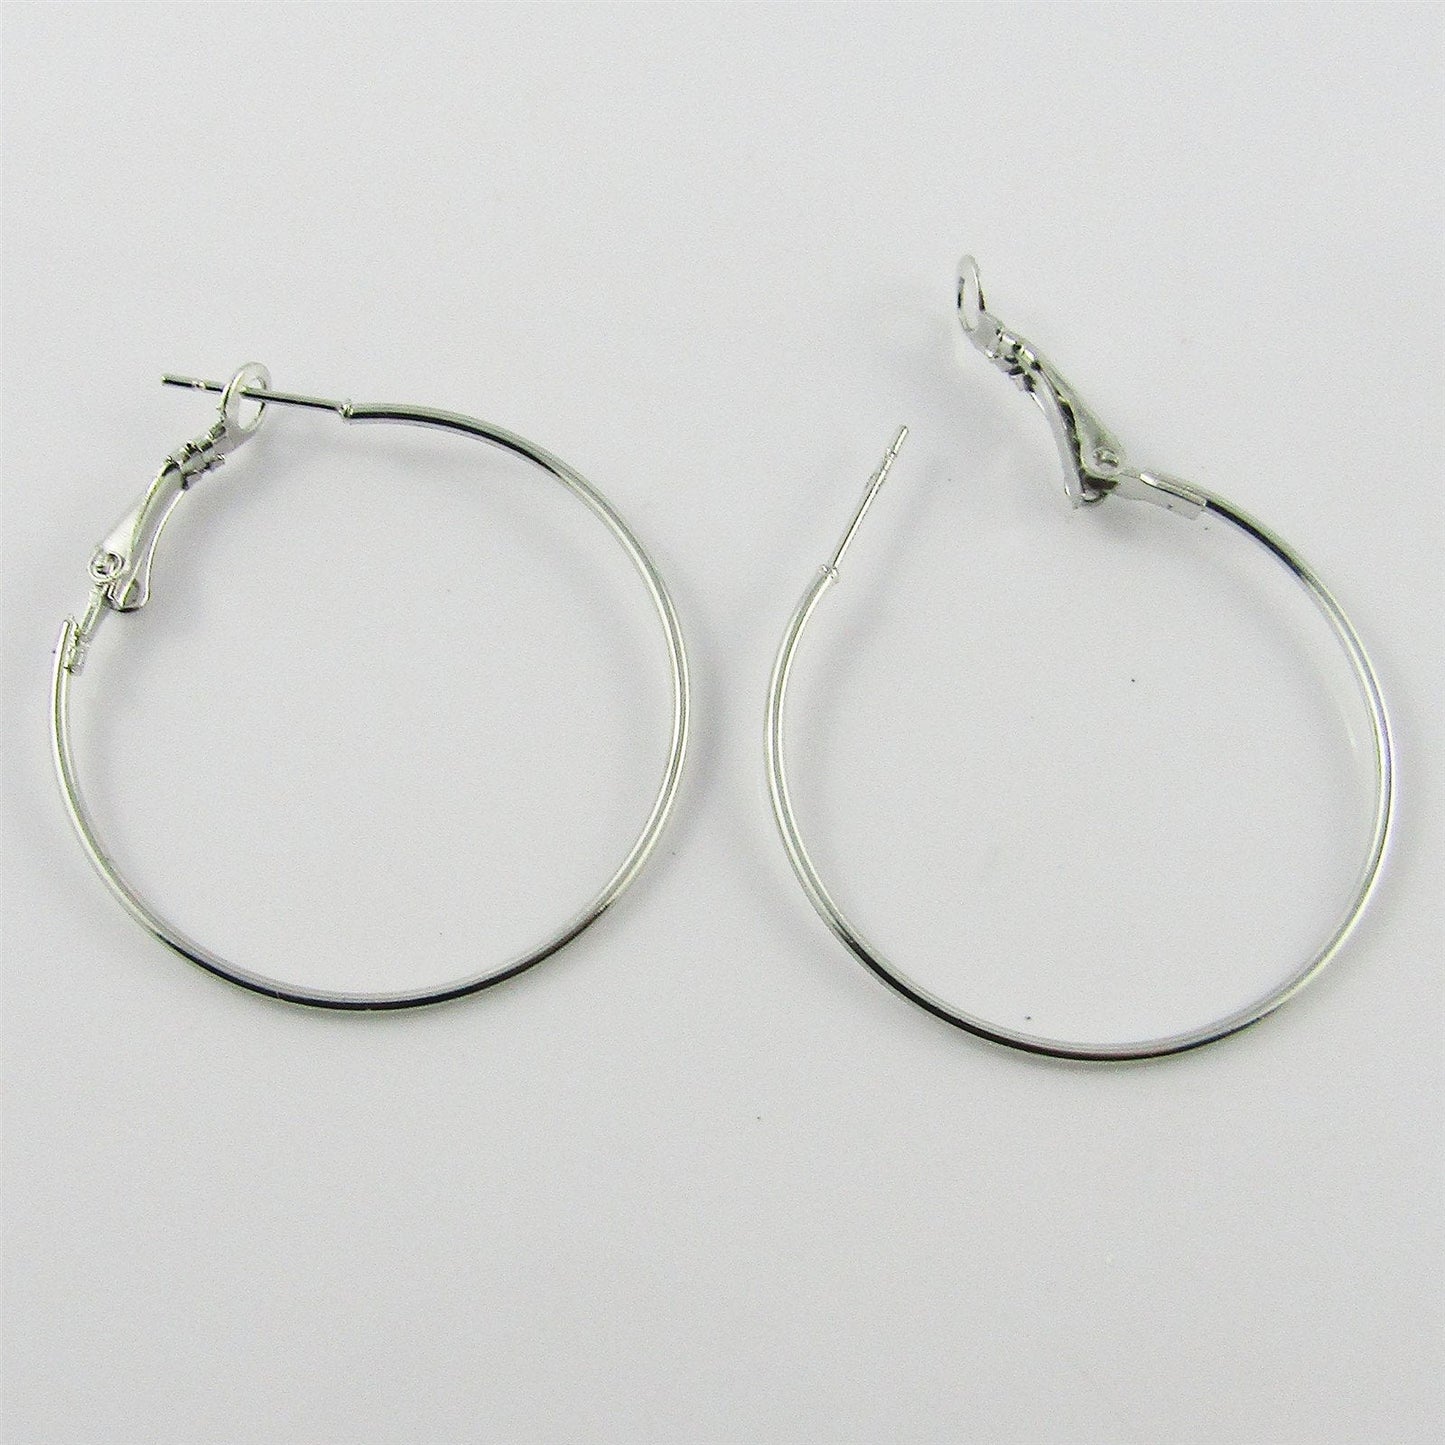 Bulk 10pcs (5pair) Round Hoop Lever Back Earring Iron 35mm Add Beads & Charms